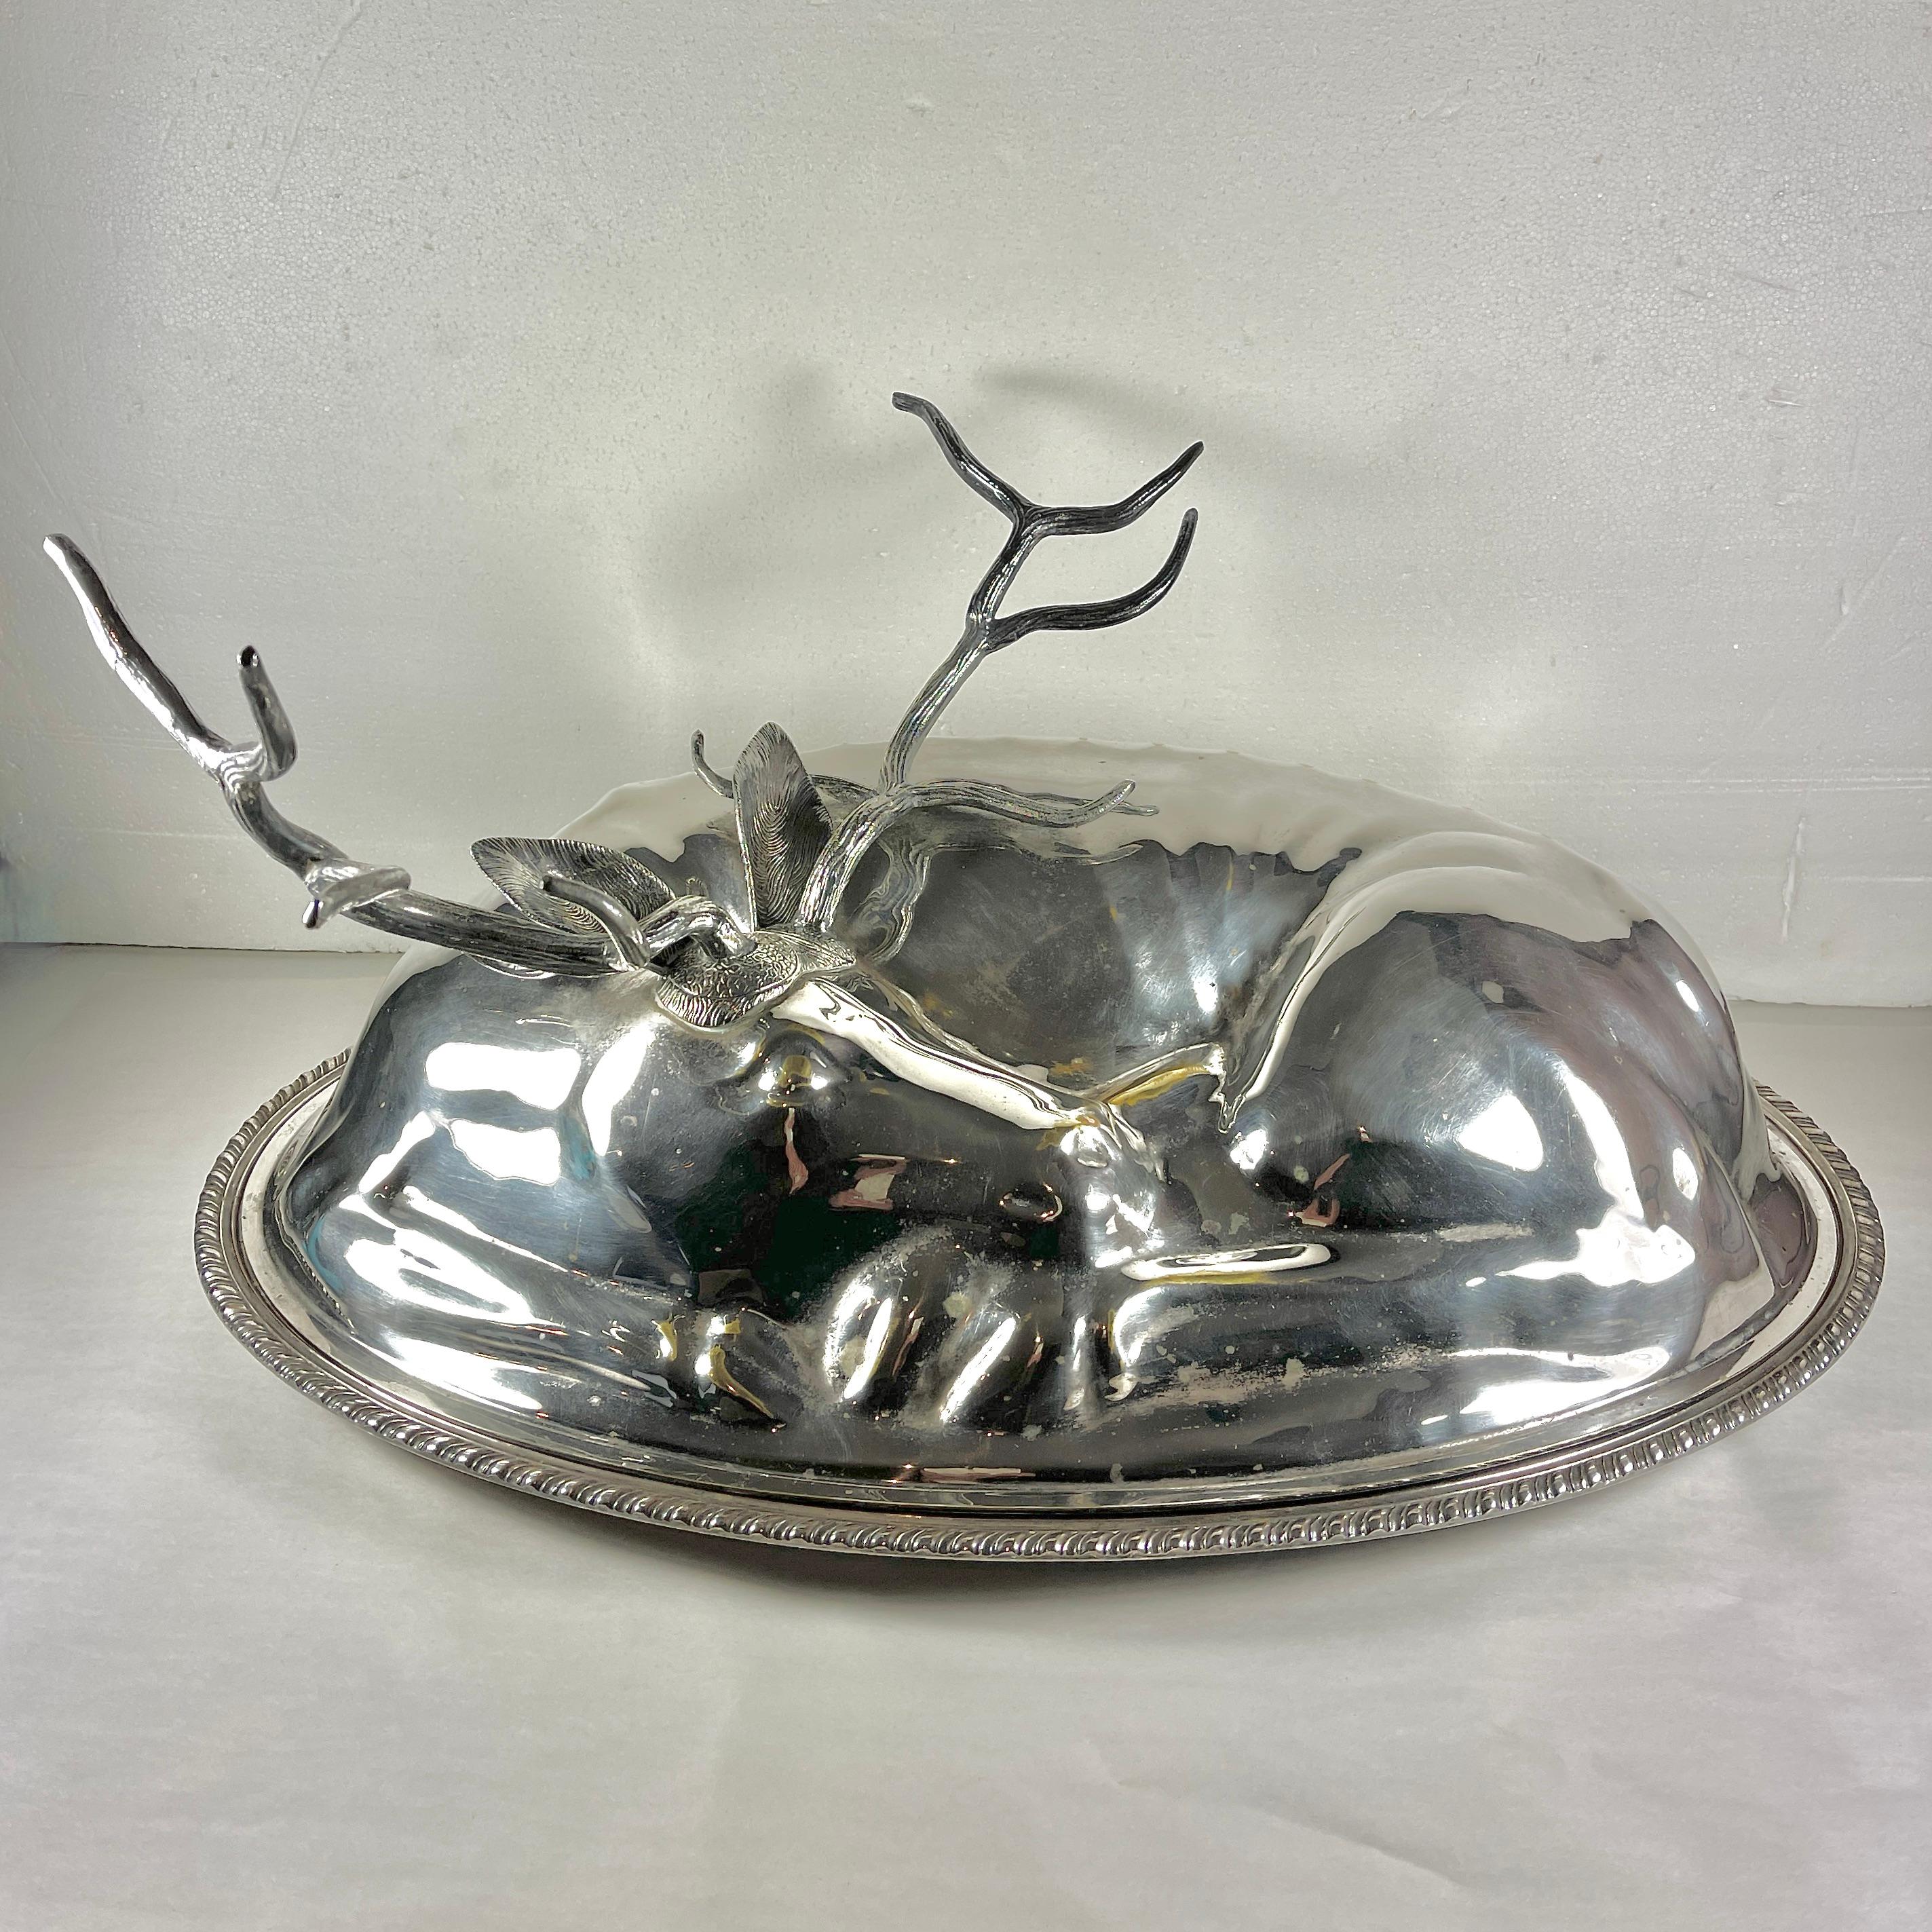 From Teghini Firenze of Florence, Italy, a monumental Mid-Century era, silver plated figural resting Stag covered serving platter, circa 1970s.

Fonderia D’Arte Teghini, Firenze, produced sophisticated, high quality hand crafted items with limited